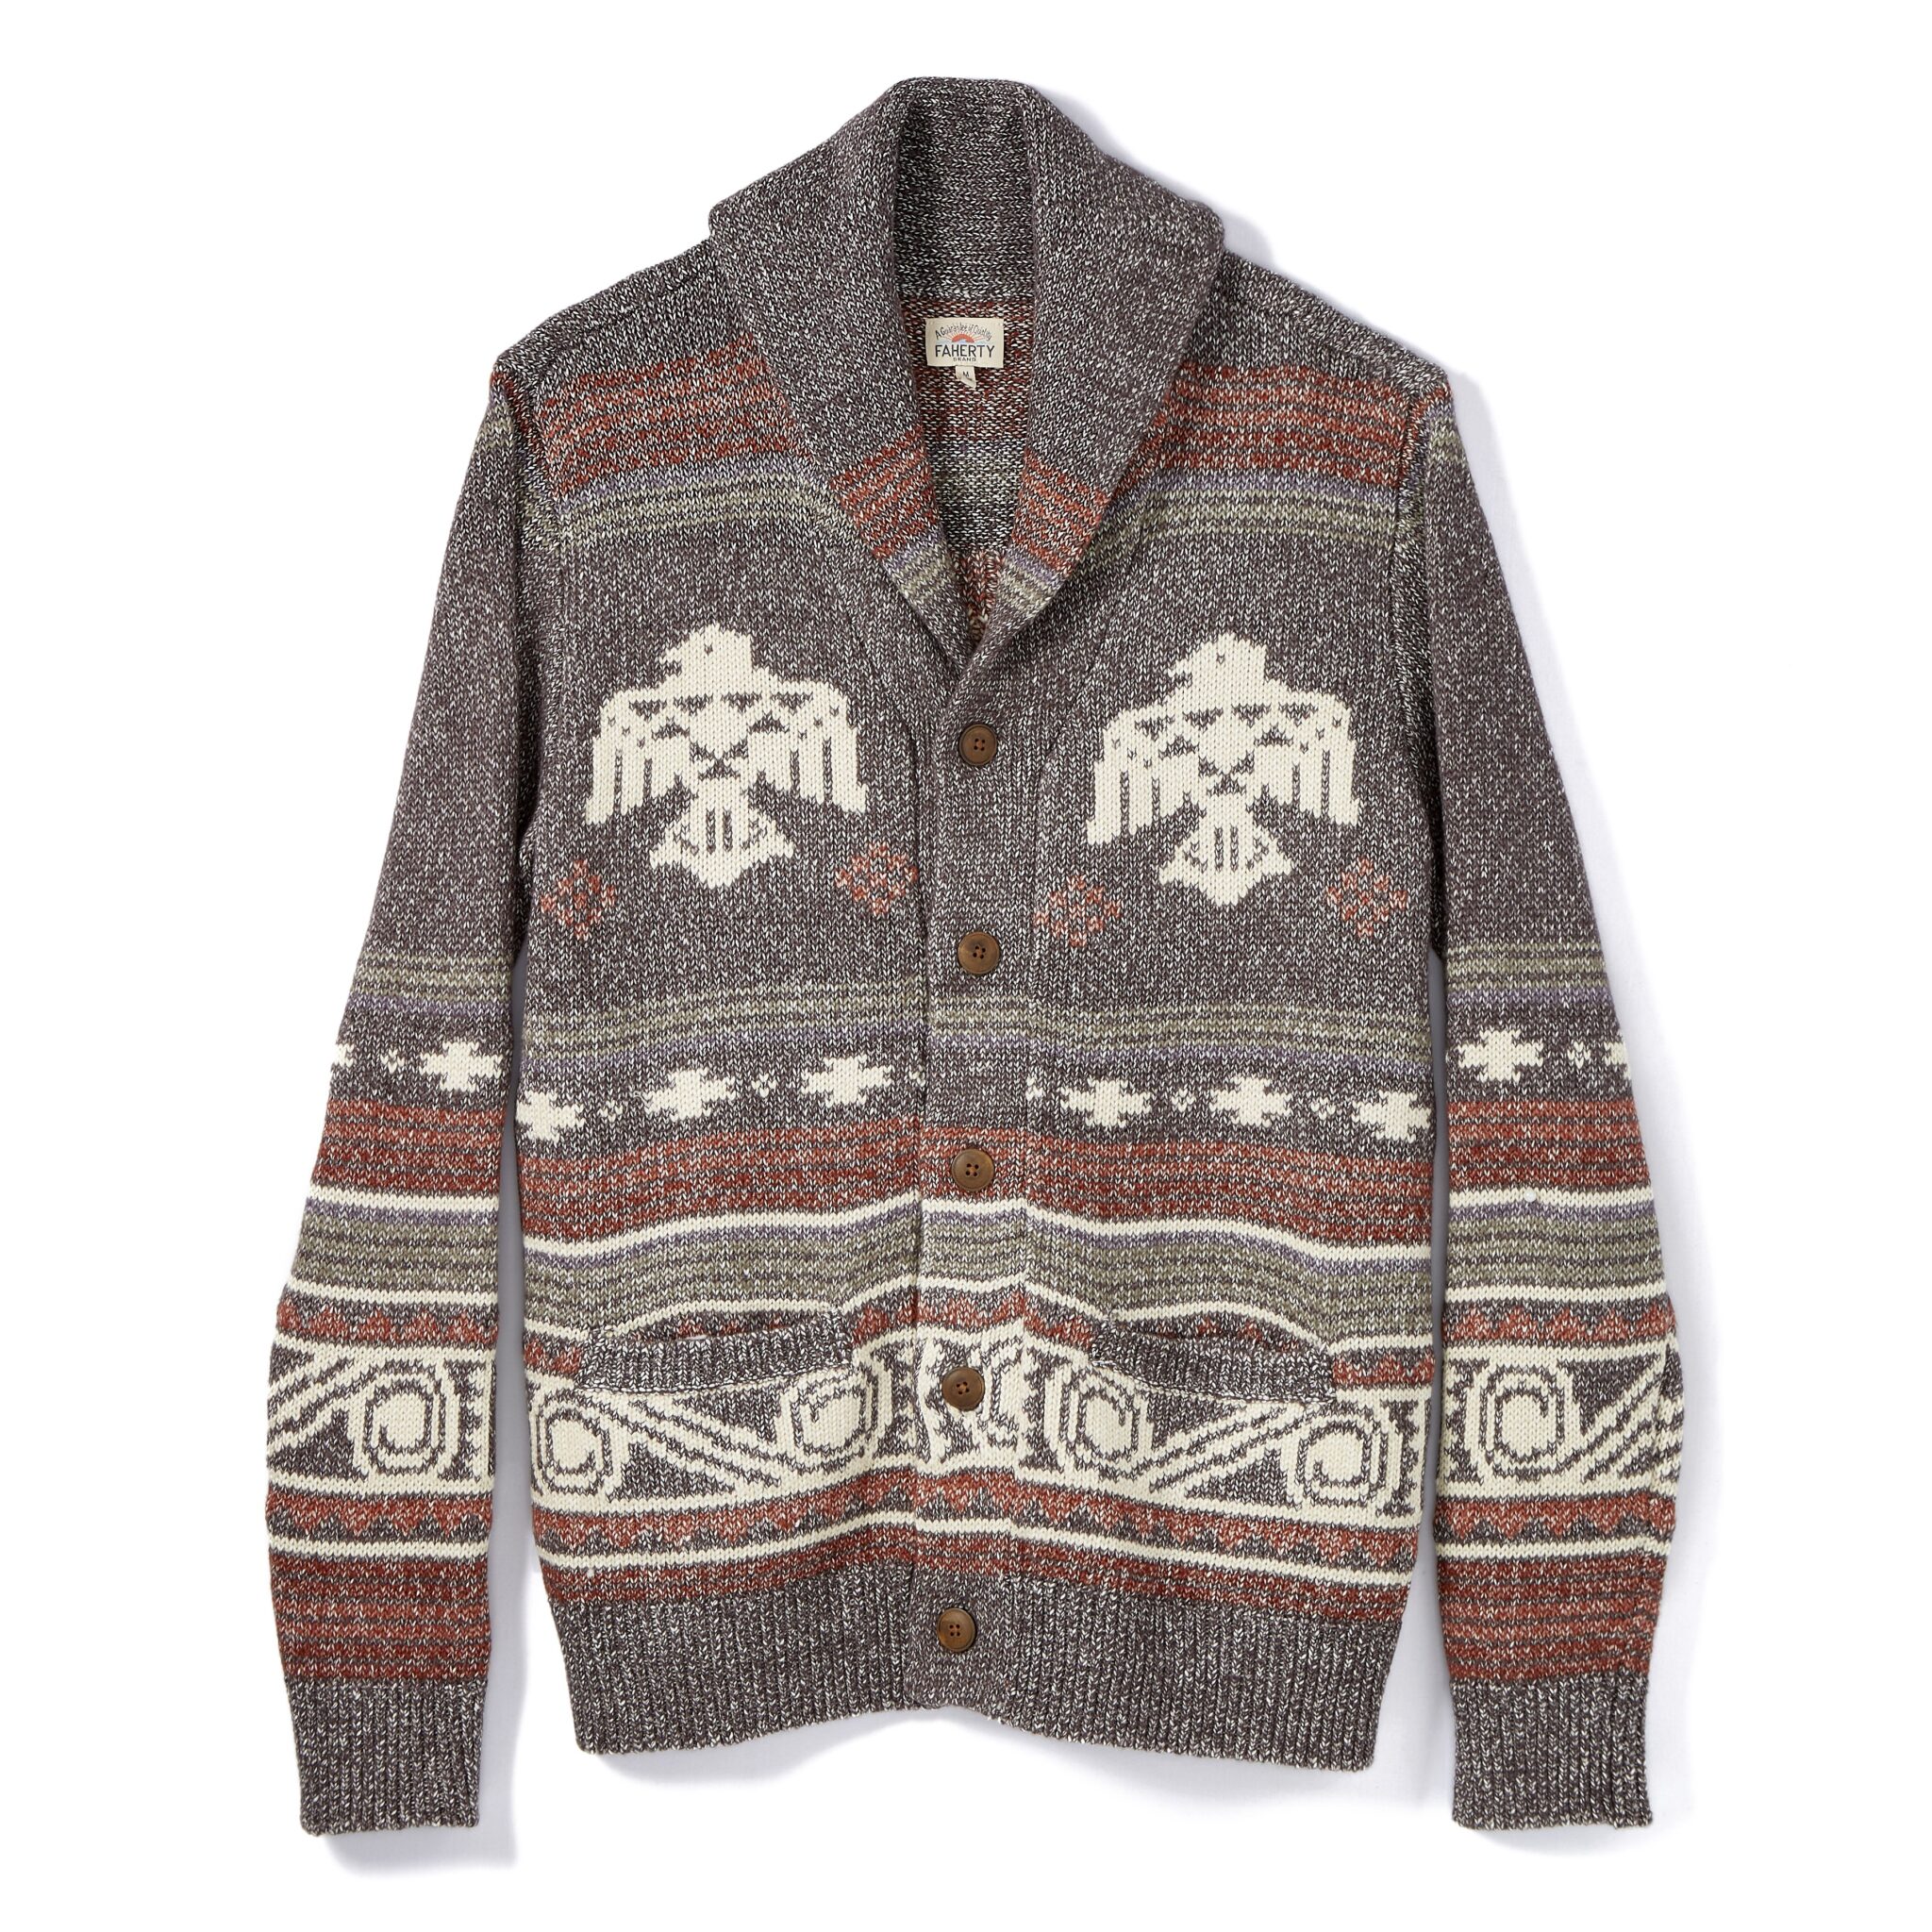 5 of the best men’s cardigans for winter | The Coolector